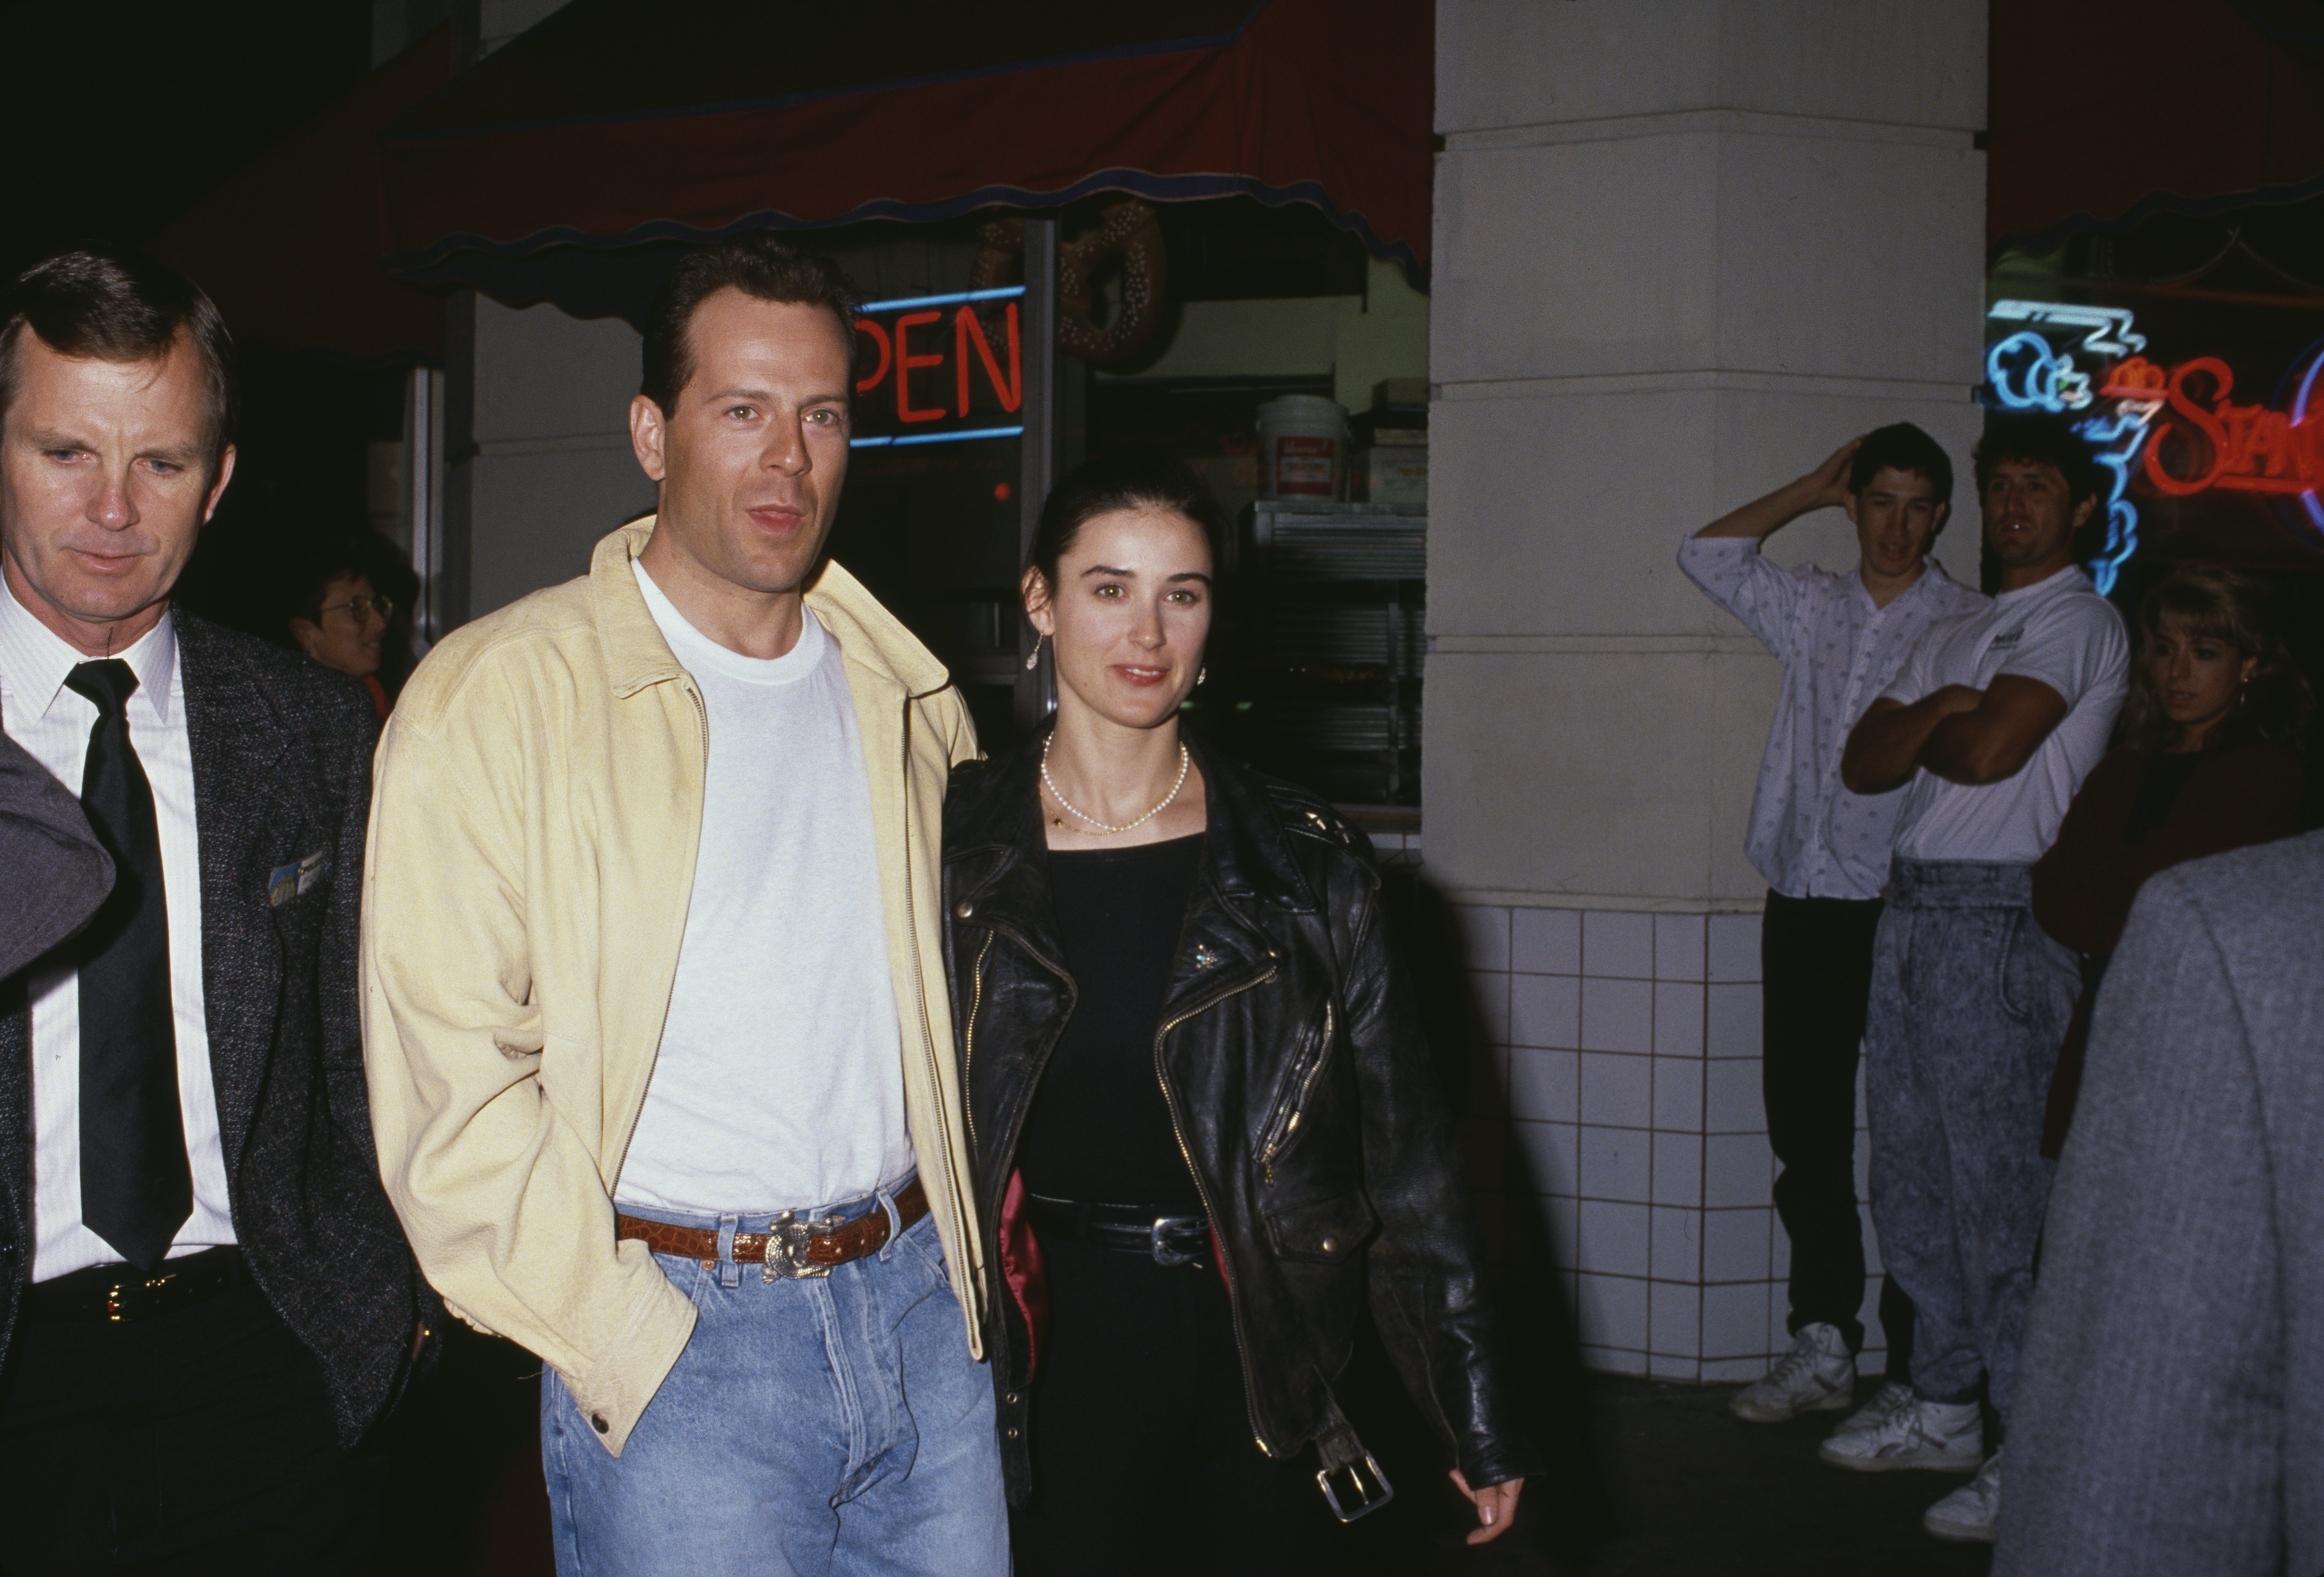 Bruce Willis and his then-wife, actress Demi Moore during the premiere of "Chances Are" at the Mann Bruin Theatre on March 8, 1989 in Los Angeles, California. / Source: Getty Images